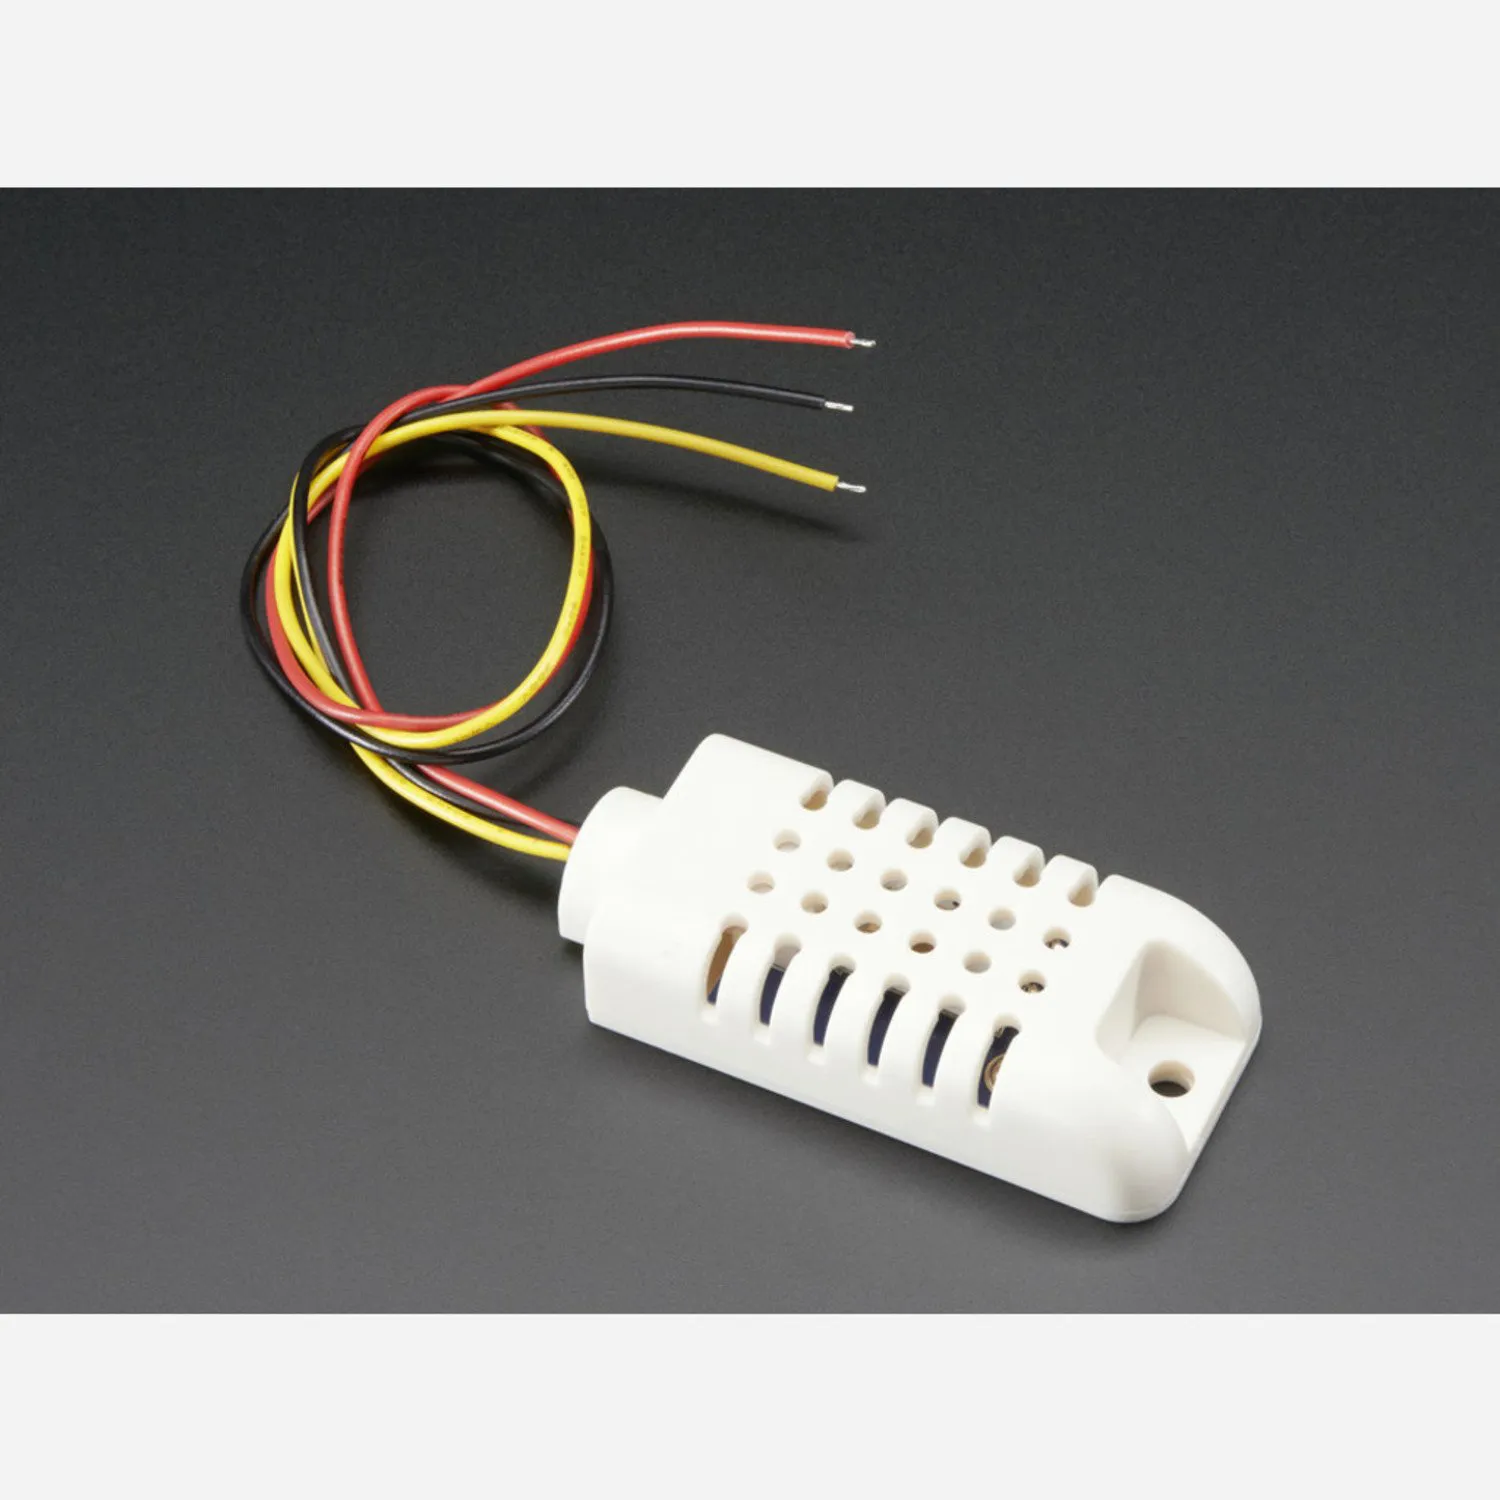 Photo of AM2302 (wired DHT22) temperature-humidity sensor